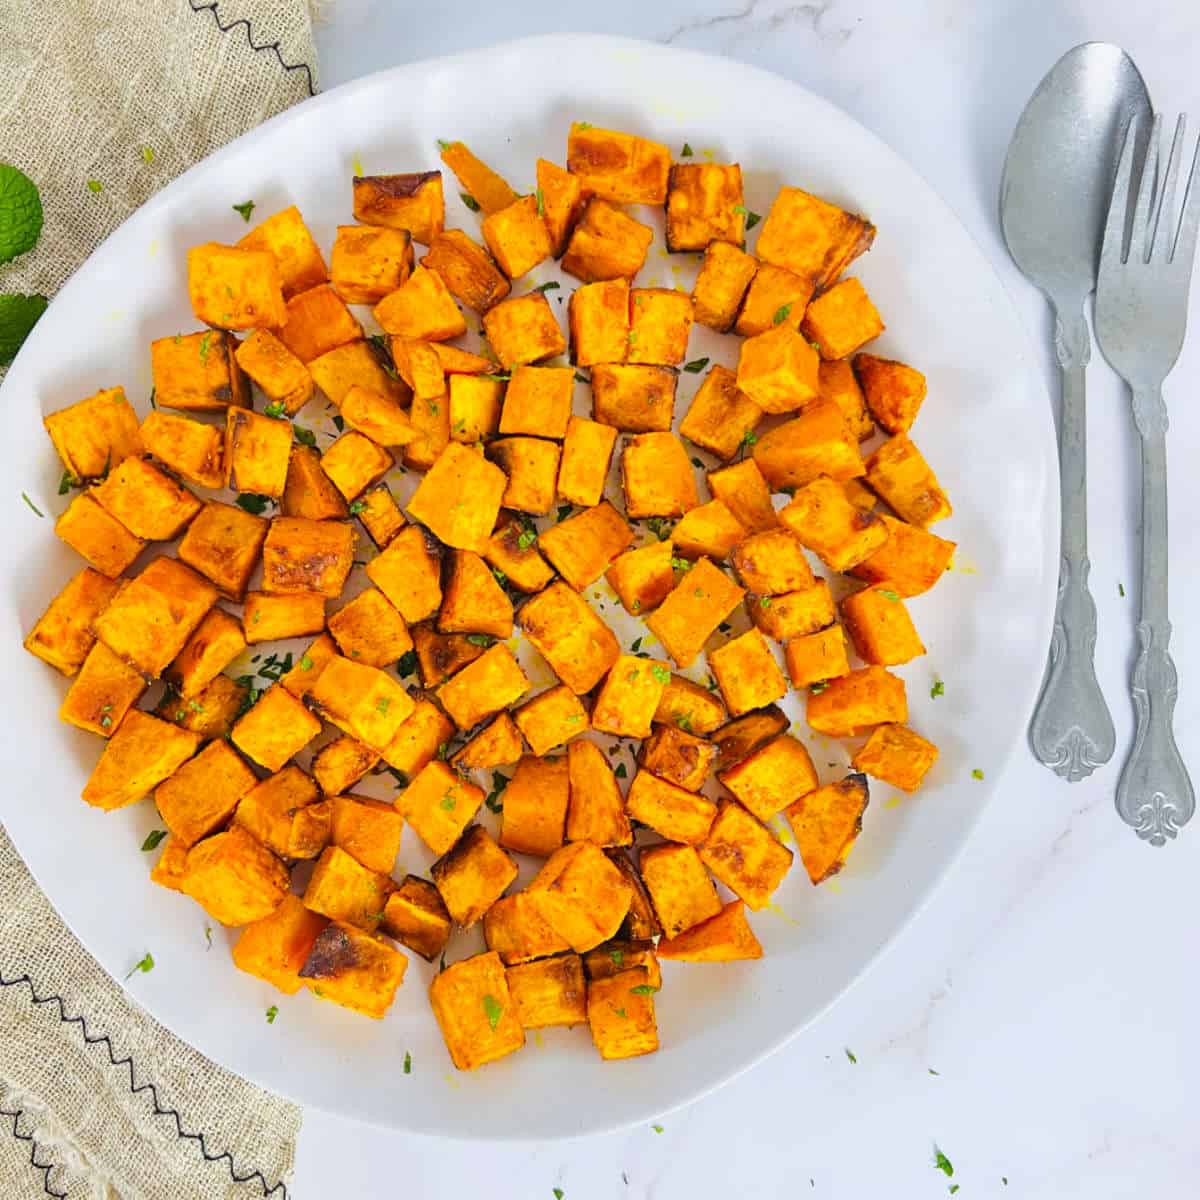 Air fryer roasted sweet potato cubes on a white plate.